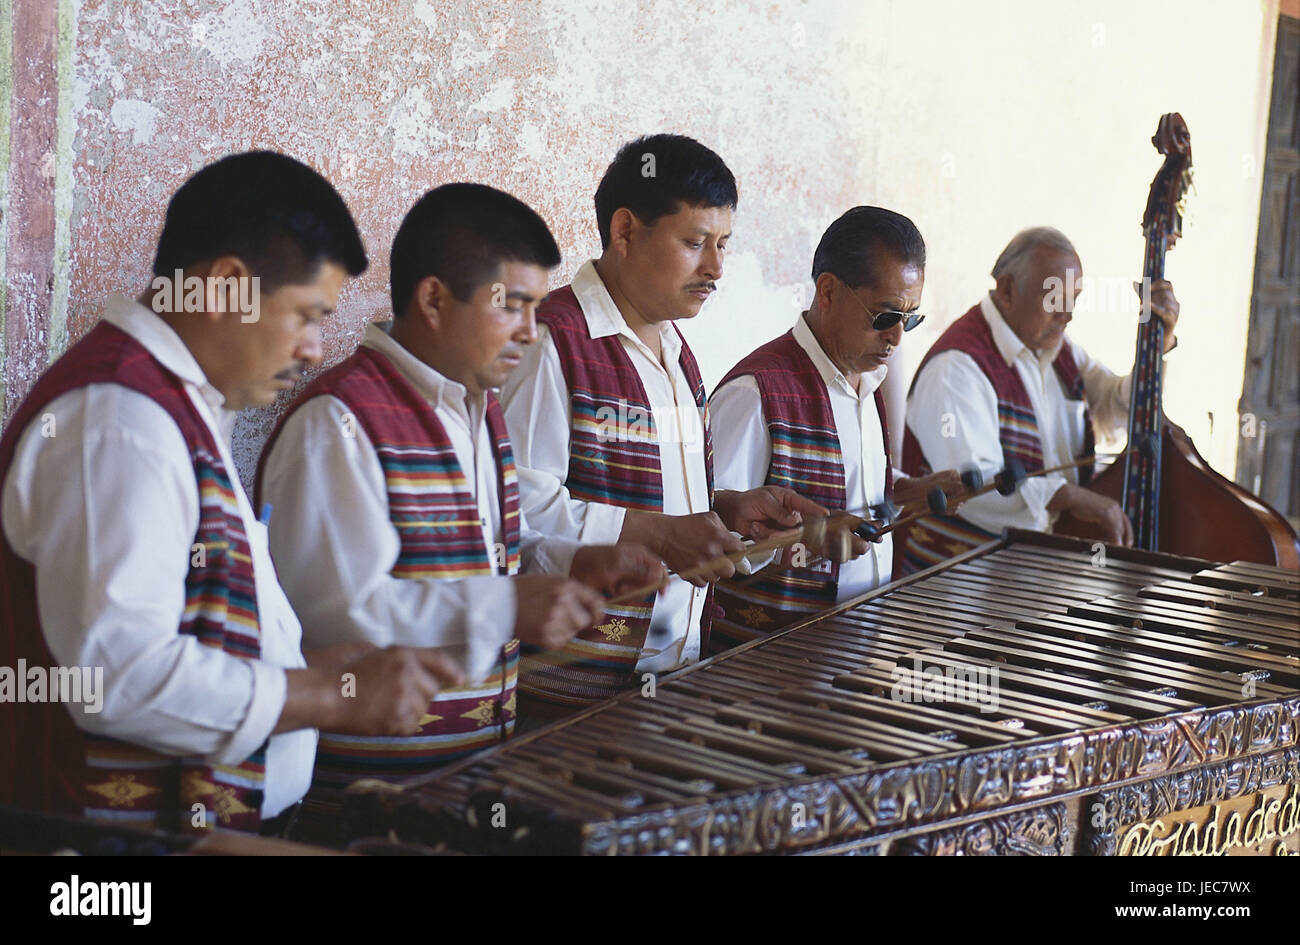 Guatemala, Antigua Guatemala, hotel of Sin Fronteras, inner courtyard, musician, Marimba, no model release, Central America, Latin America, town, destination, tourism, hotel facility, tradition, folklore, live, live music, music, make music, play, instruments, group, person, men, Marimbaphon, percussion instrument, xylophone, Stock Photo